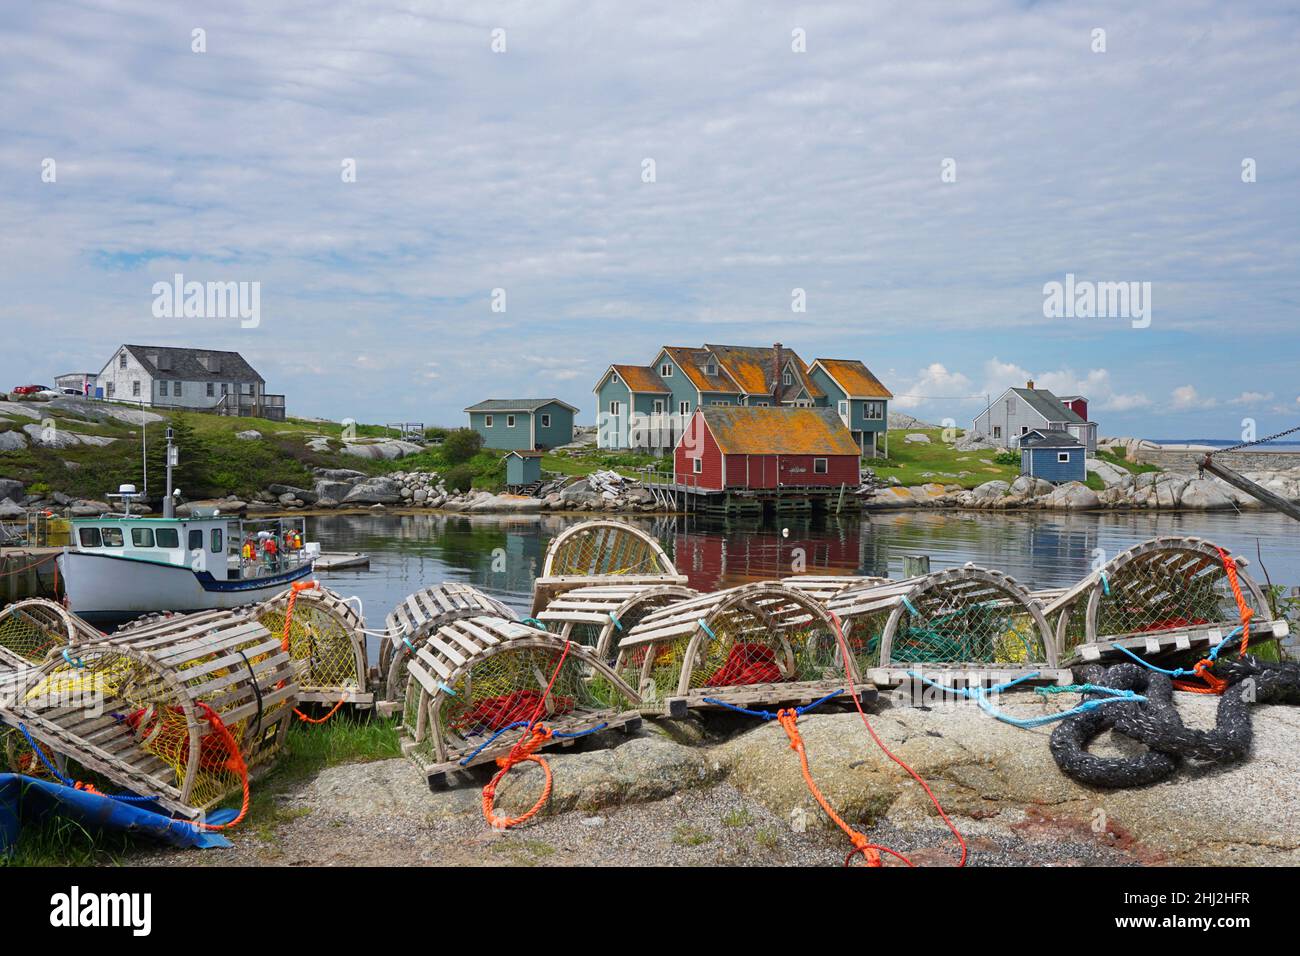 Wooden lobster traps and a fishing boat in Peggys Cove, Nova Scotia, Canada Stock Photo